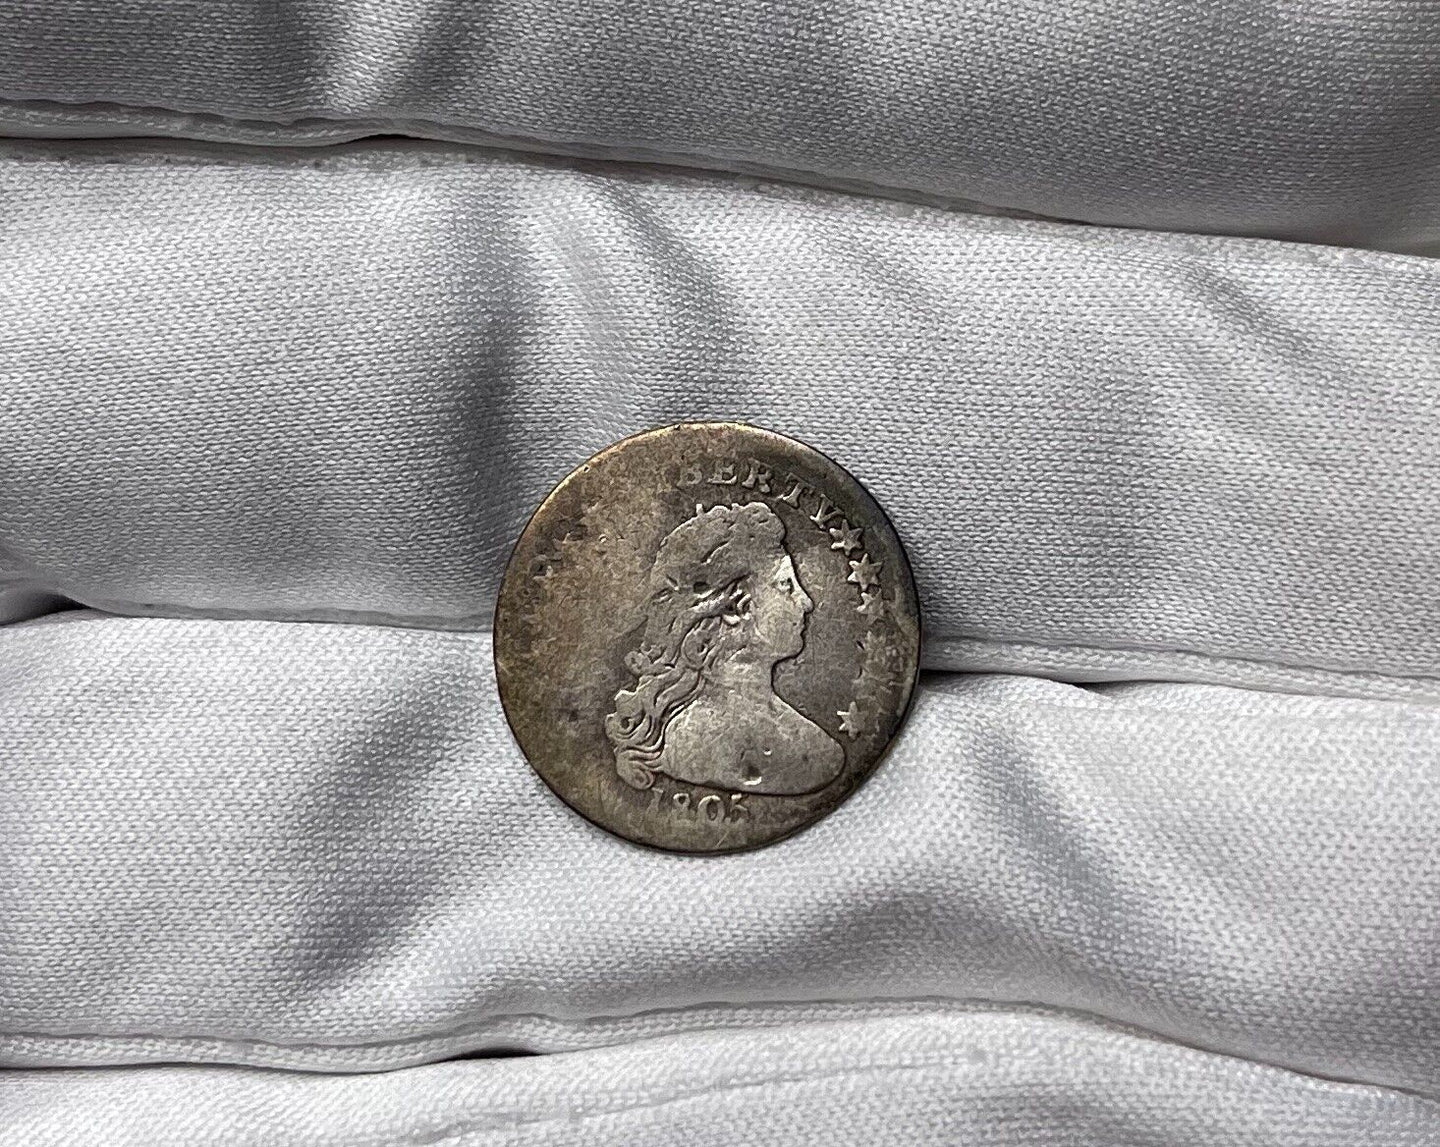 1805 Draped Bust Half Dime - Very Rare Date & Type Coin - Low-Mintage of 15,600!